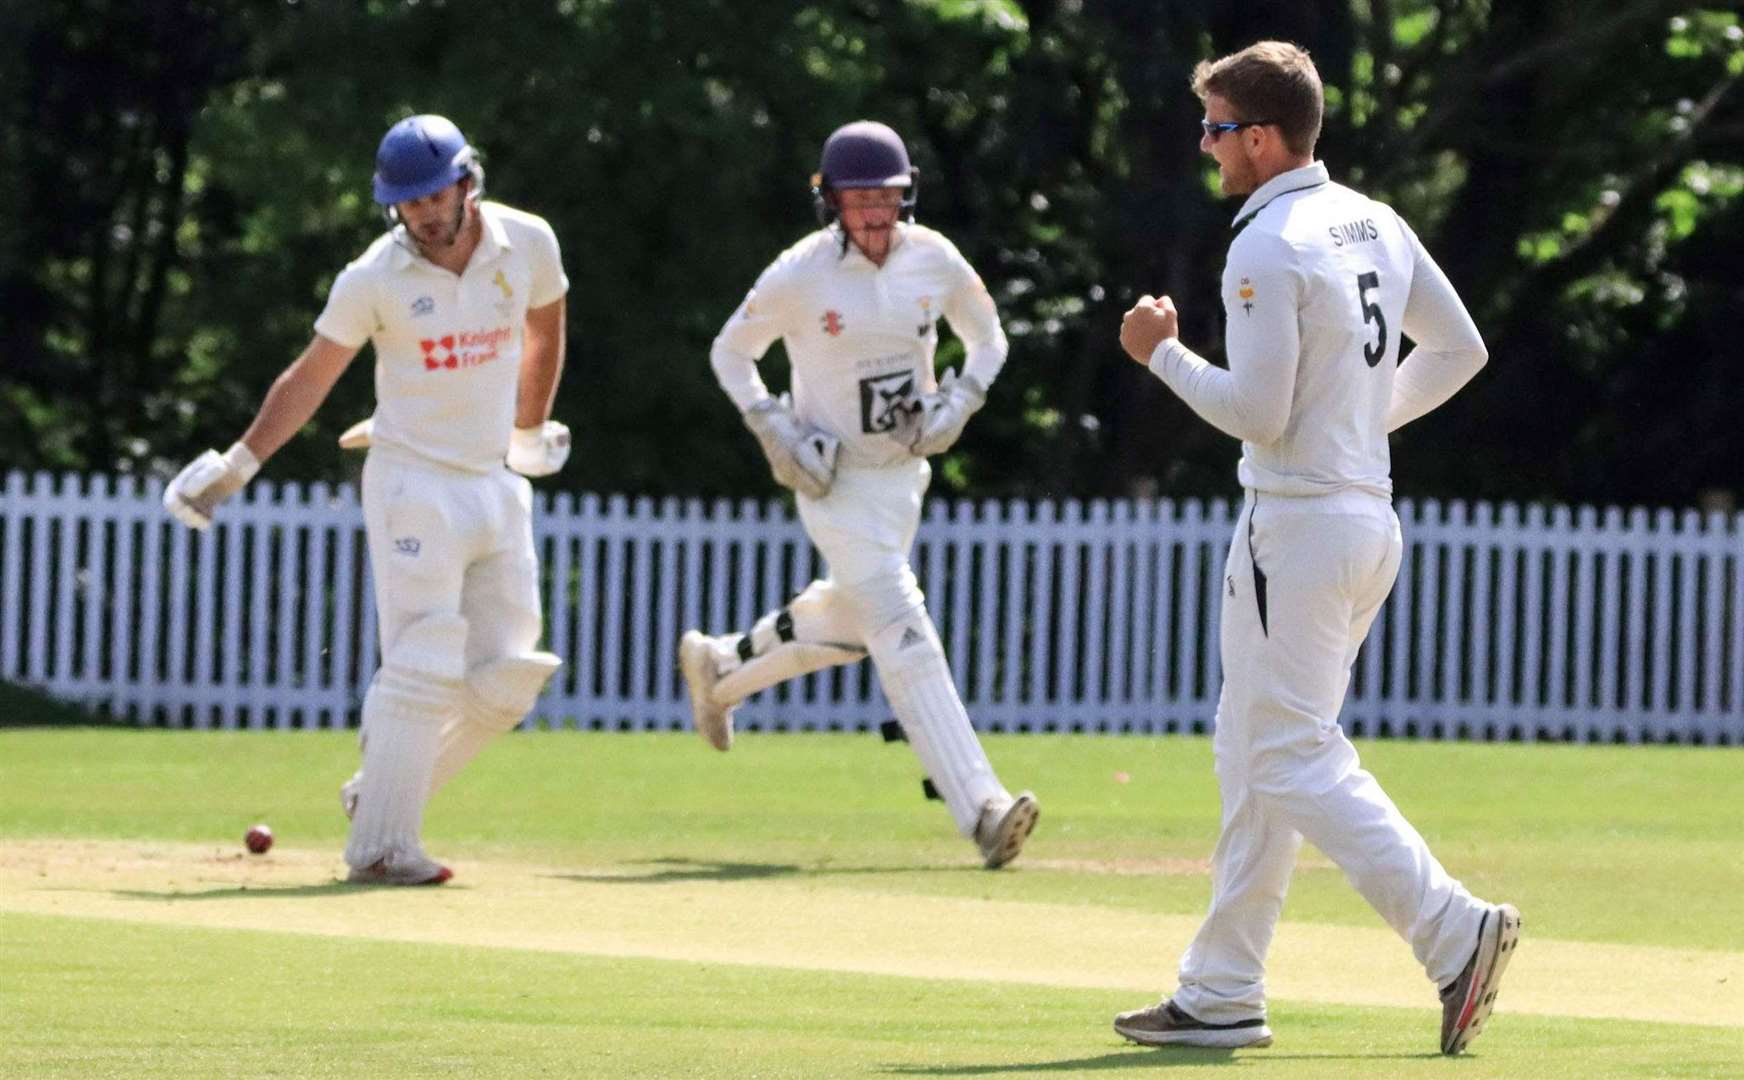 Jack Laraman claimed figures of 5-17 from 3.5 overs in Holmesdale's measly 78 all out. Picture: Allen Hollands